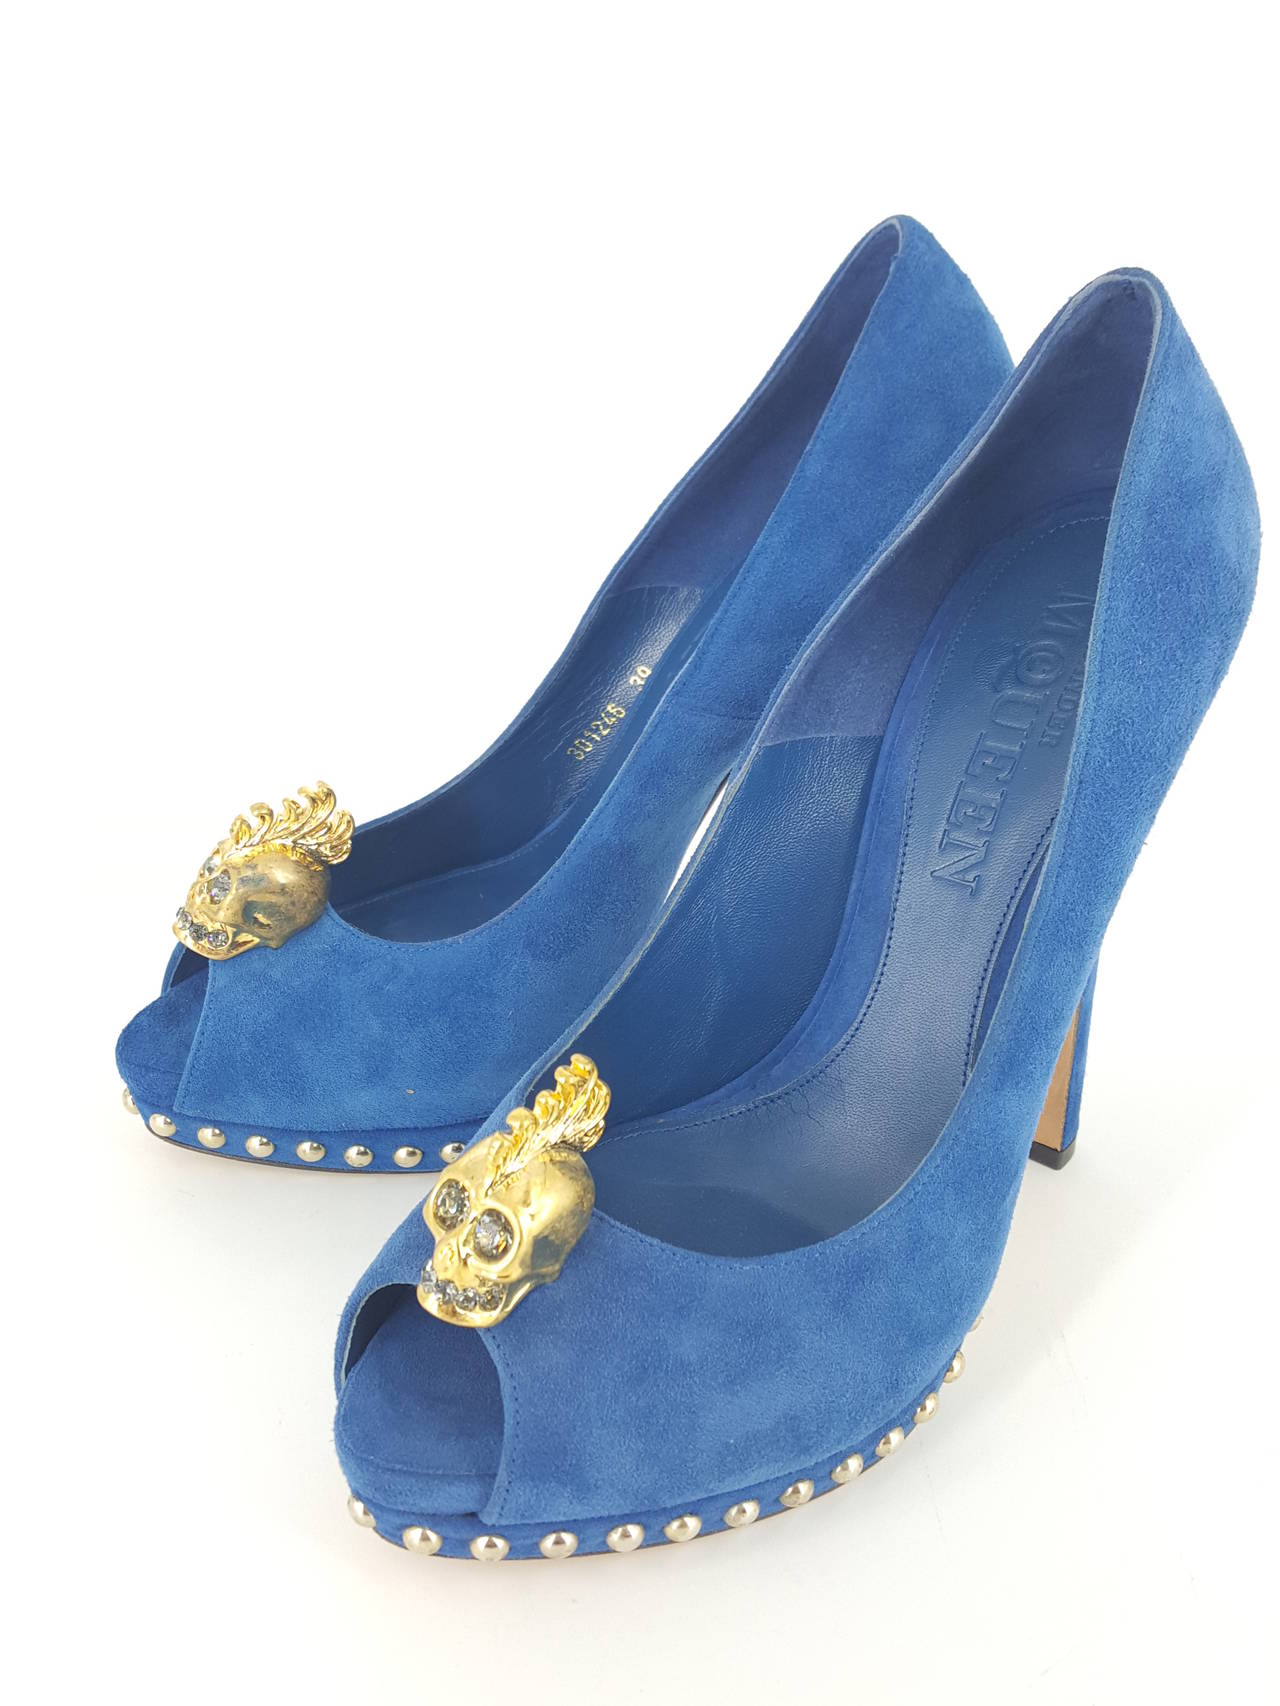 Offered for sale  are these fabulous Cobalt blue suede peep toe Platform pumps by Alexander McQueen in size 39.
These are in a never worn condition and a great look.  The large skull ornament on the toe has crystal eyes and teeth.  A splendid